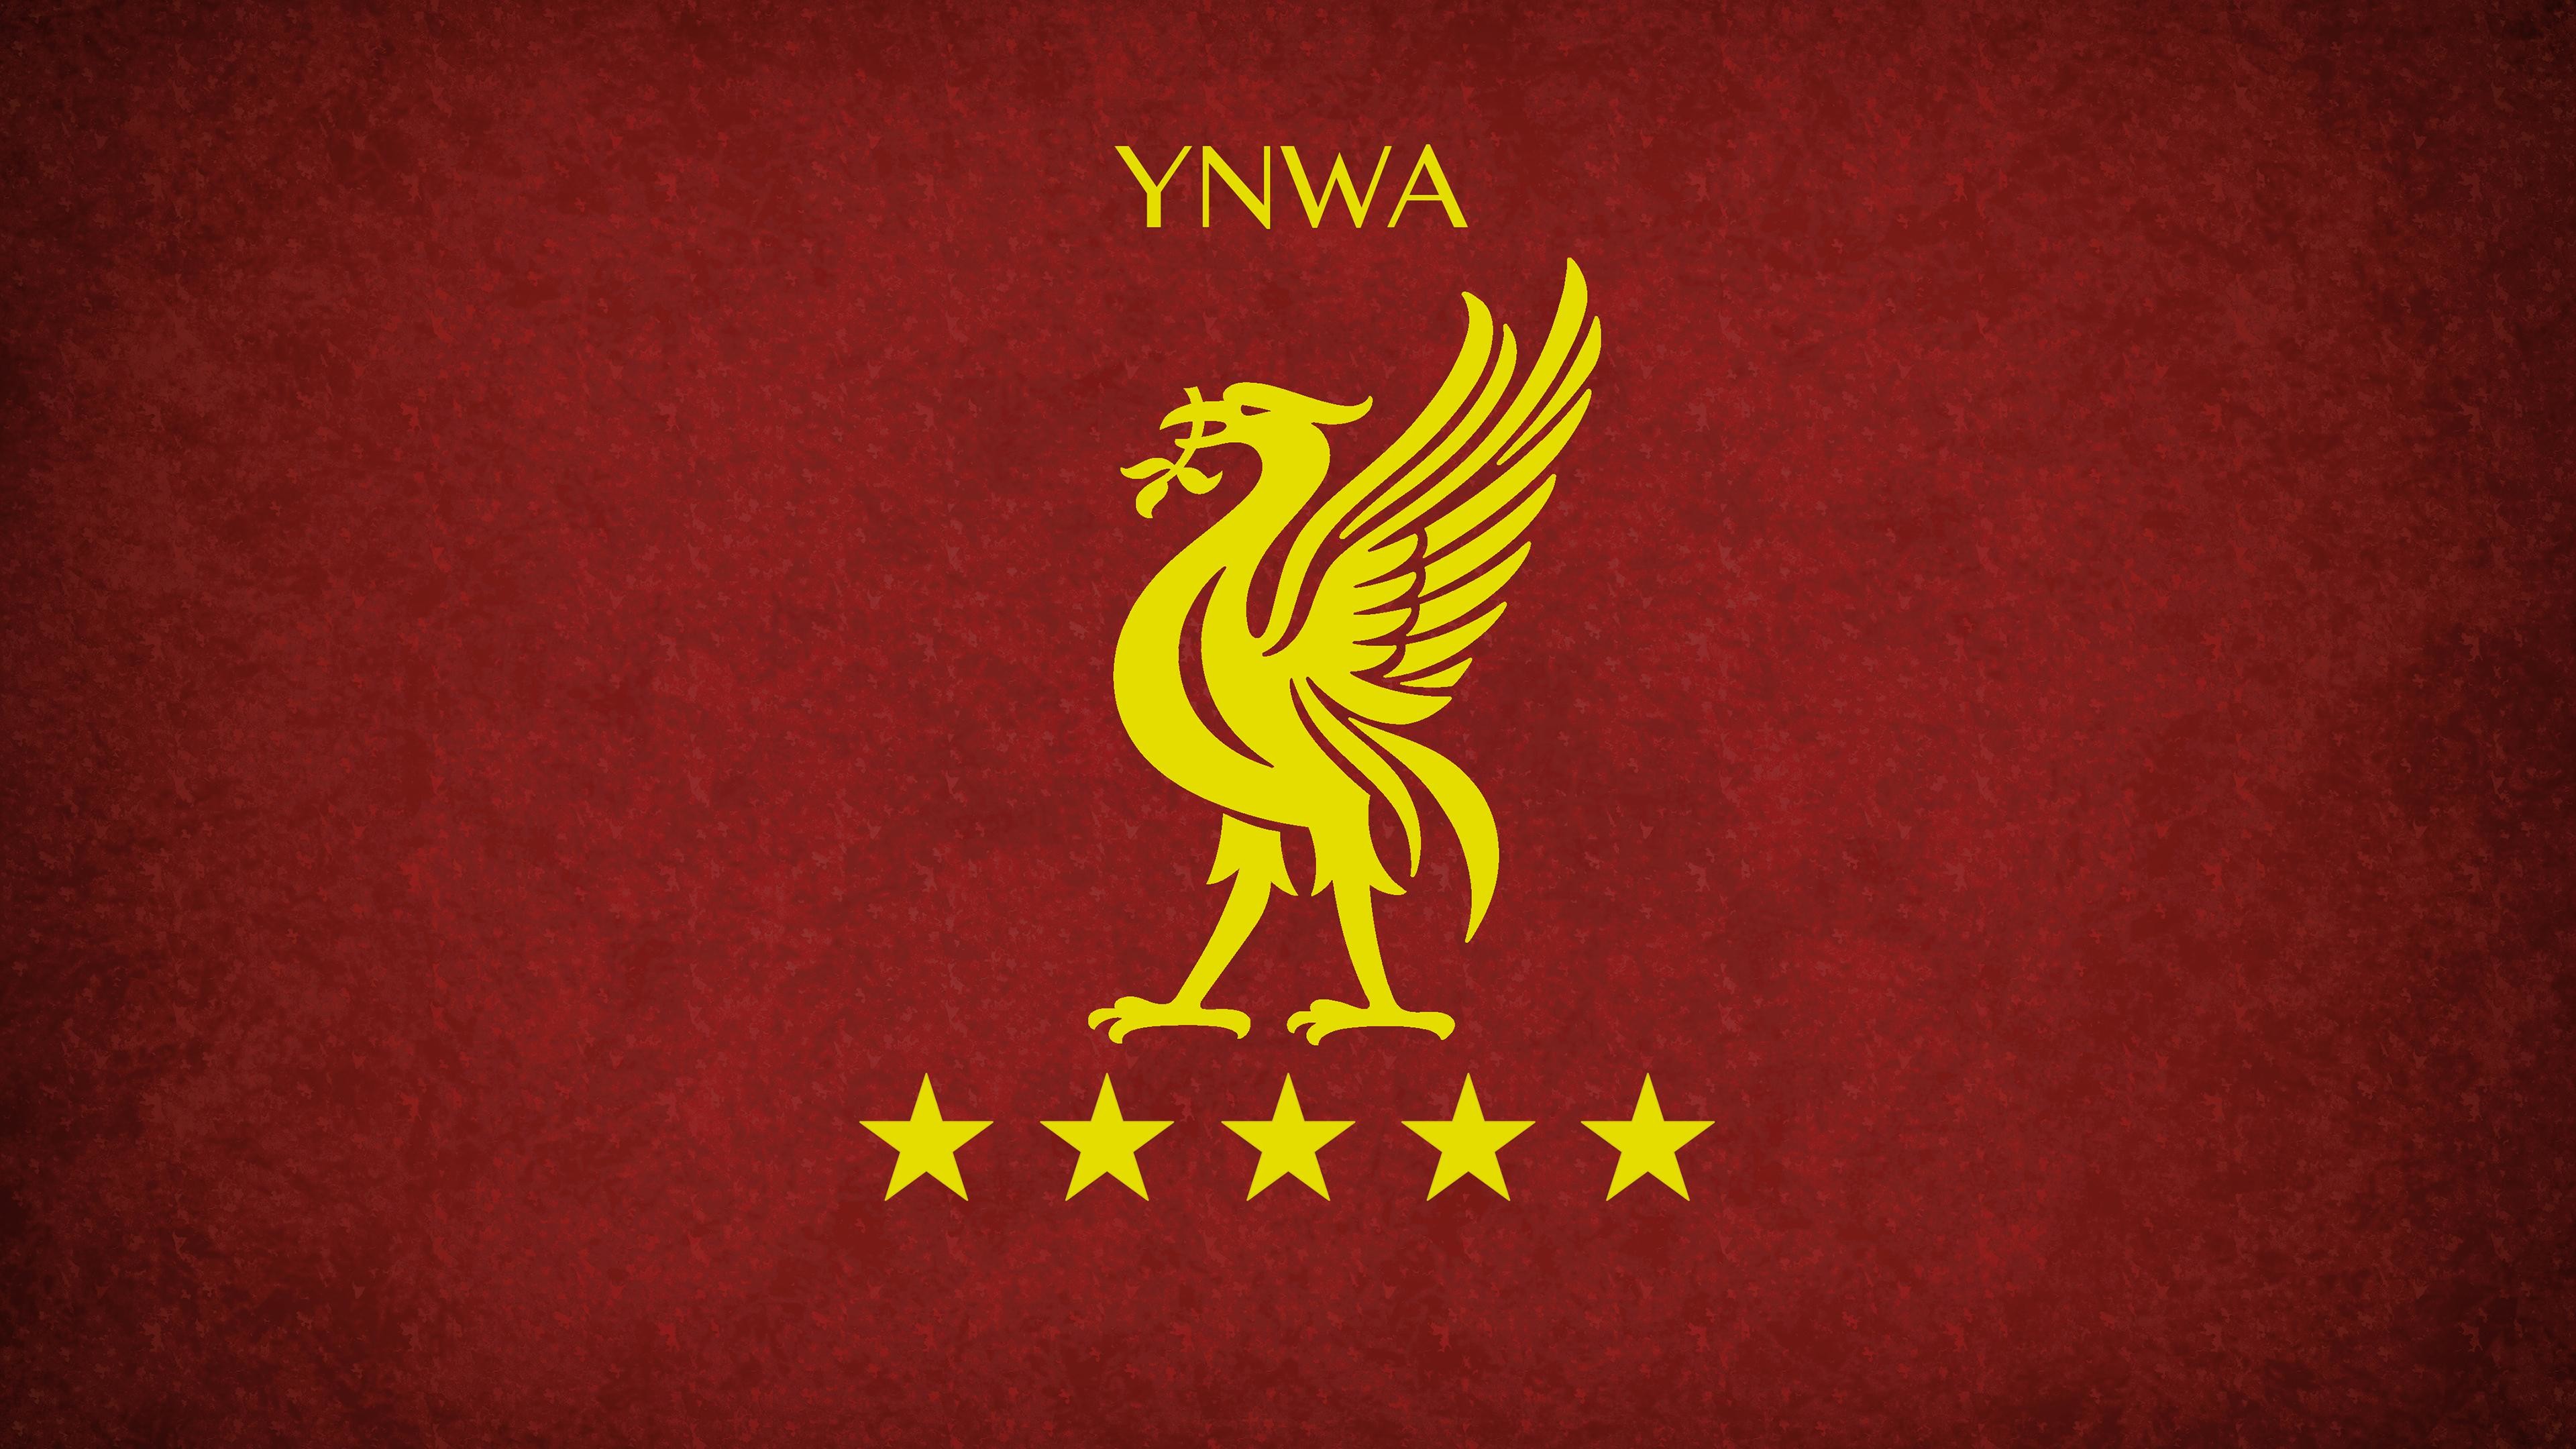 3840x2160 [High Res- Album] LFC Wallpaper for you all - YNWA - Mobile Versions  available. : LiverpoolFC